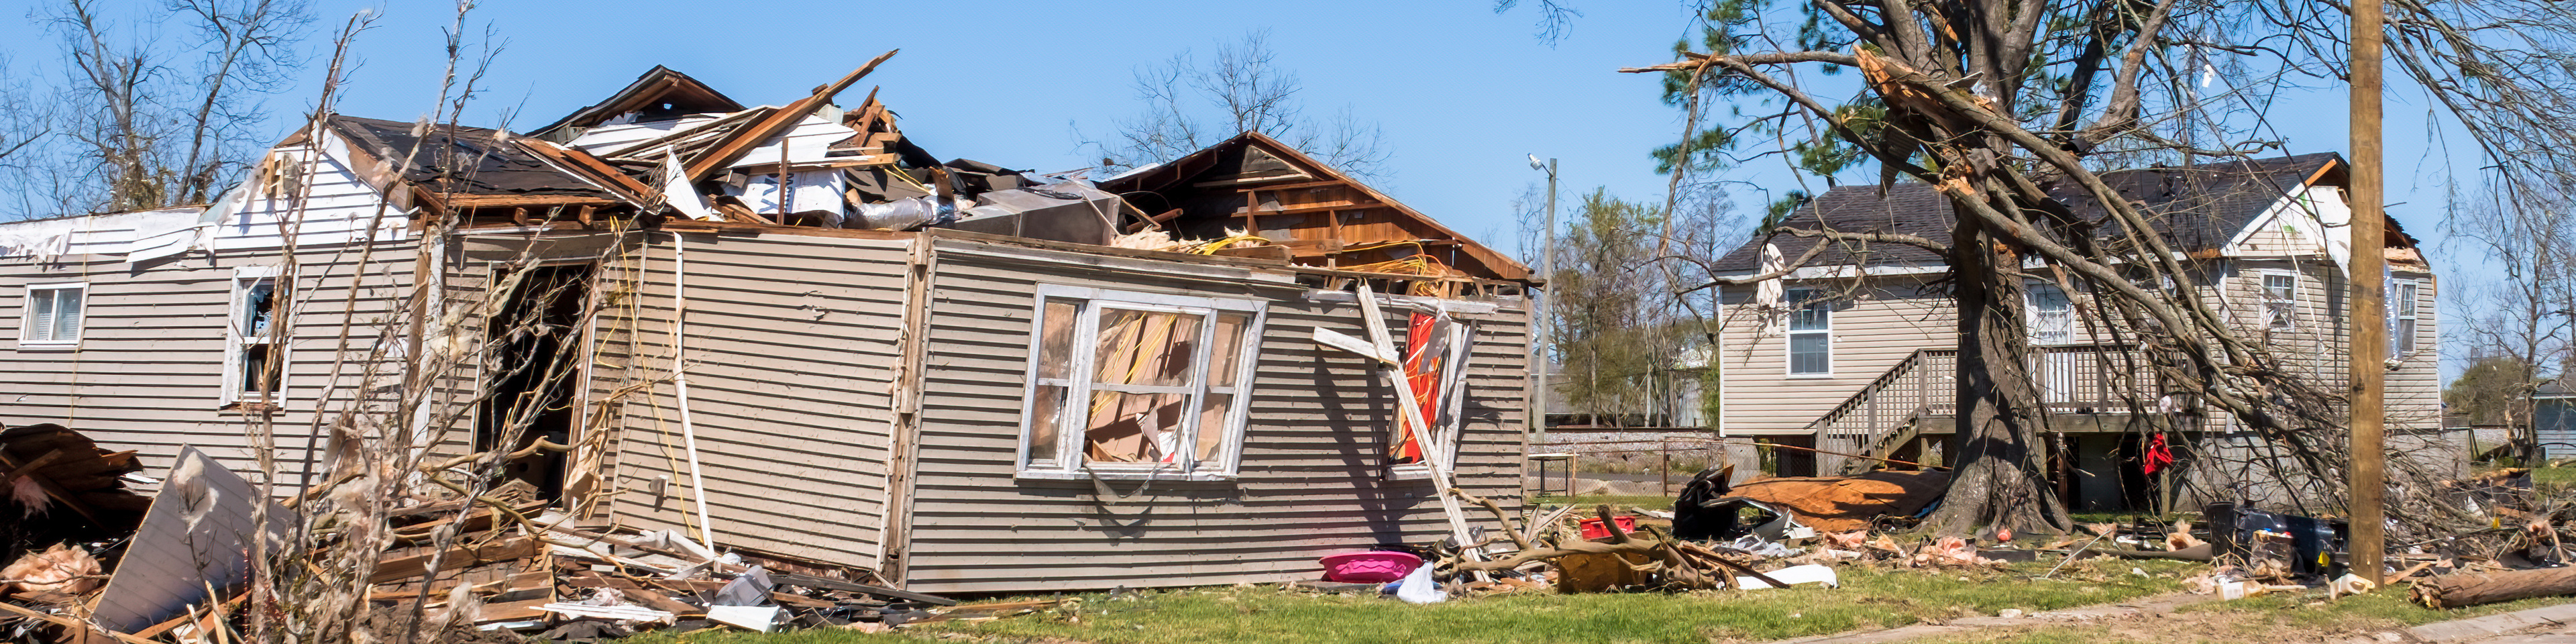 Tax relief for victims of Missouri severe storms, straight-line winds, tornadoes, and flooding: IRA and HSA deadlines postponed